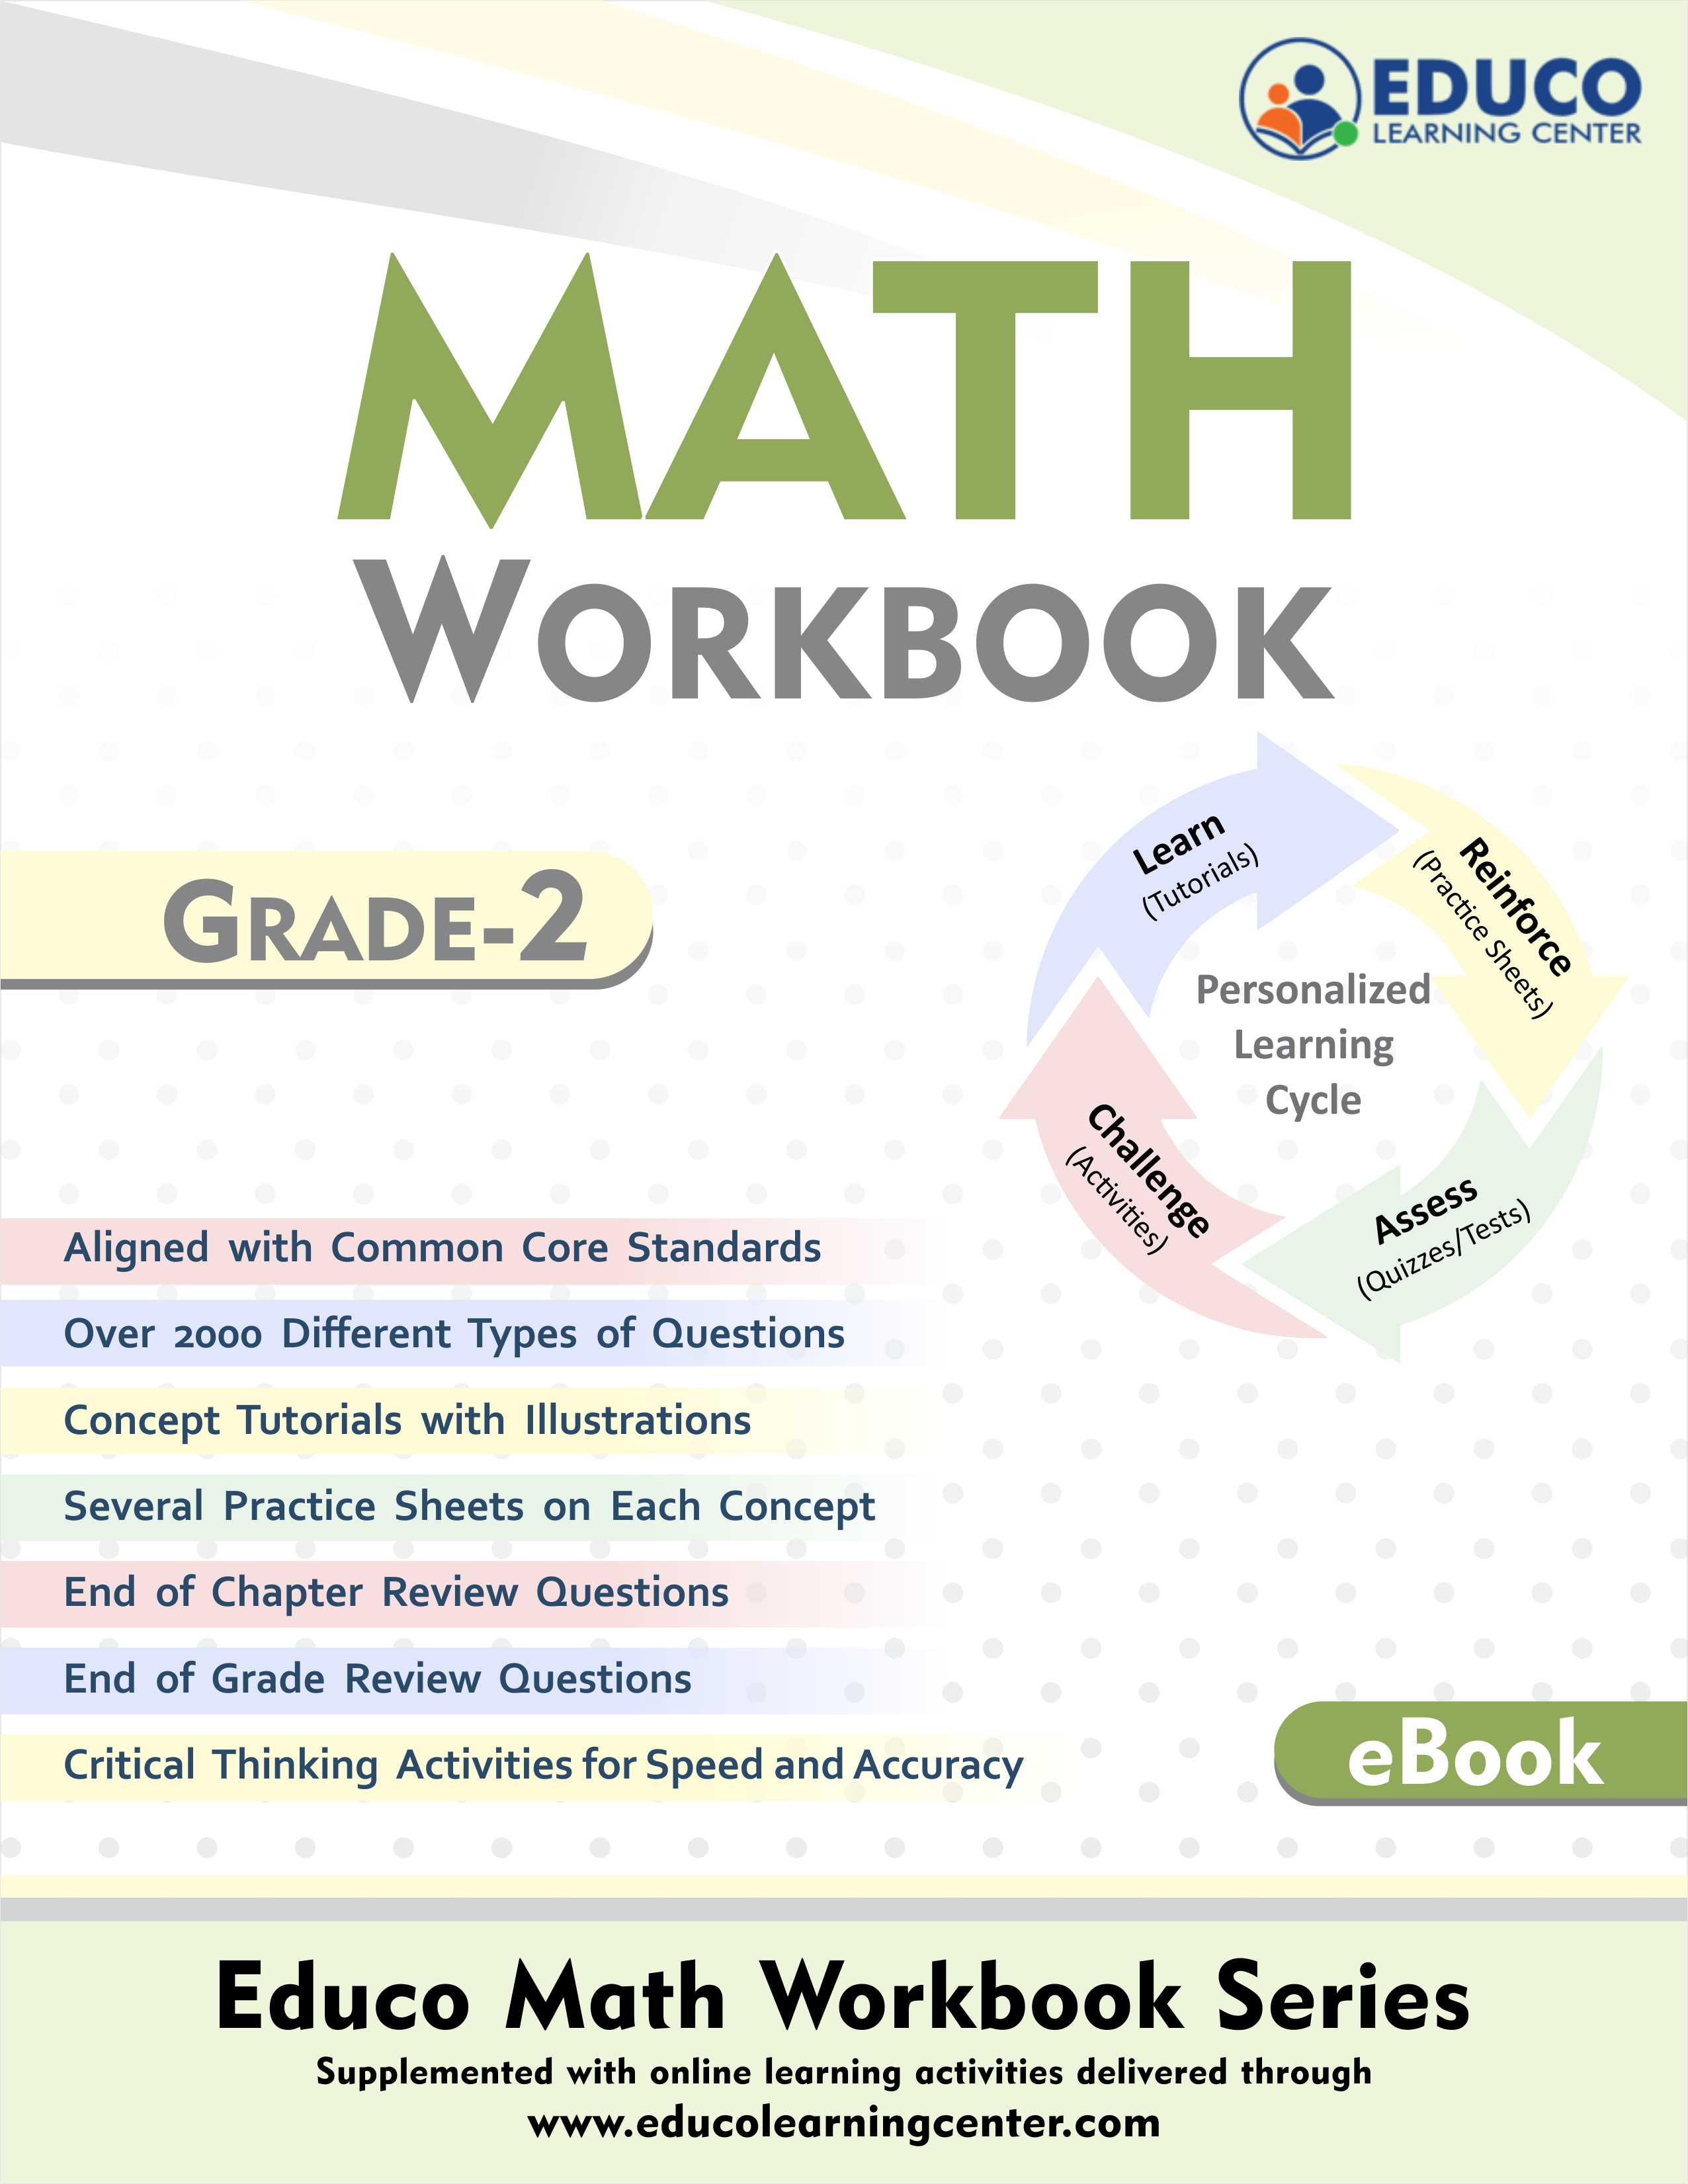 Grade 2 Math Printable Workbook including over 2000 Different types of Math Questions